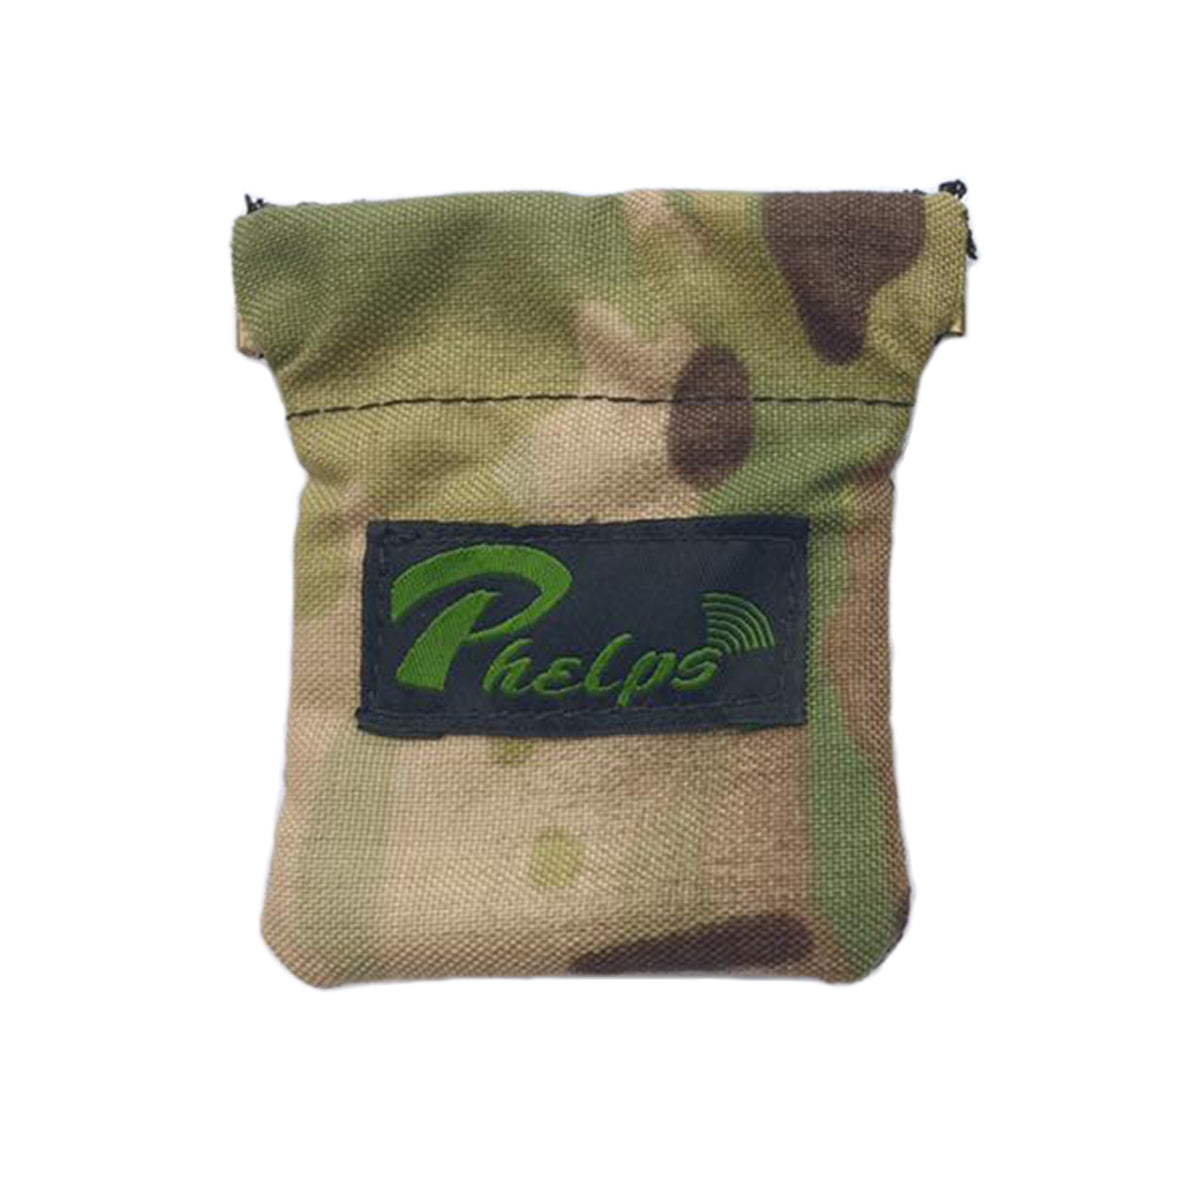 Phelps Game Calls Squeeze Call Pouch in Phelps Game Calls Squeeze Call Pouch by Phelps Game Calls | Gear - goHUNT Shop by GOHUNT | Phelps Game Calls - GOHUNT Shop